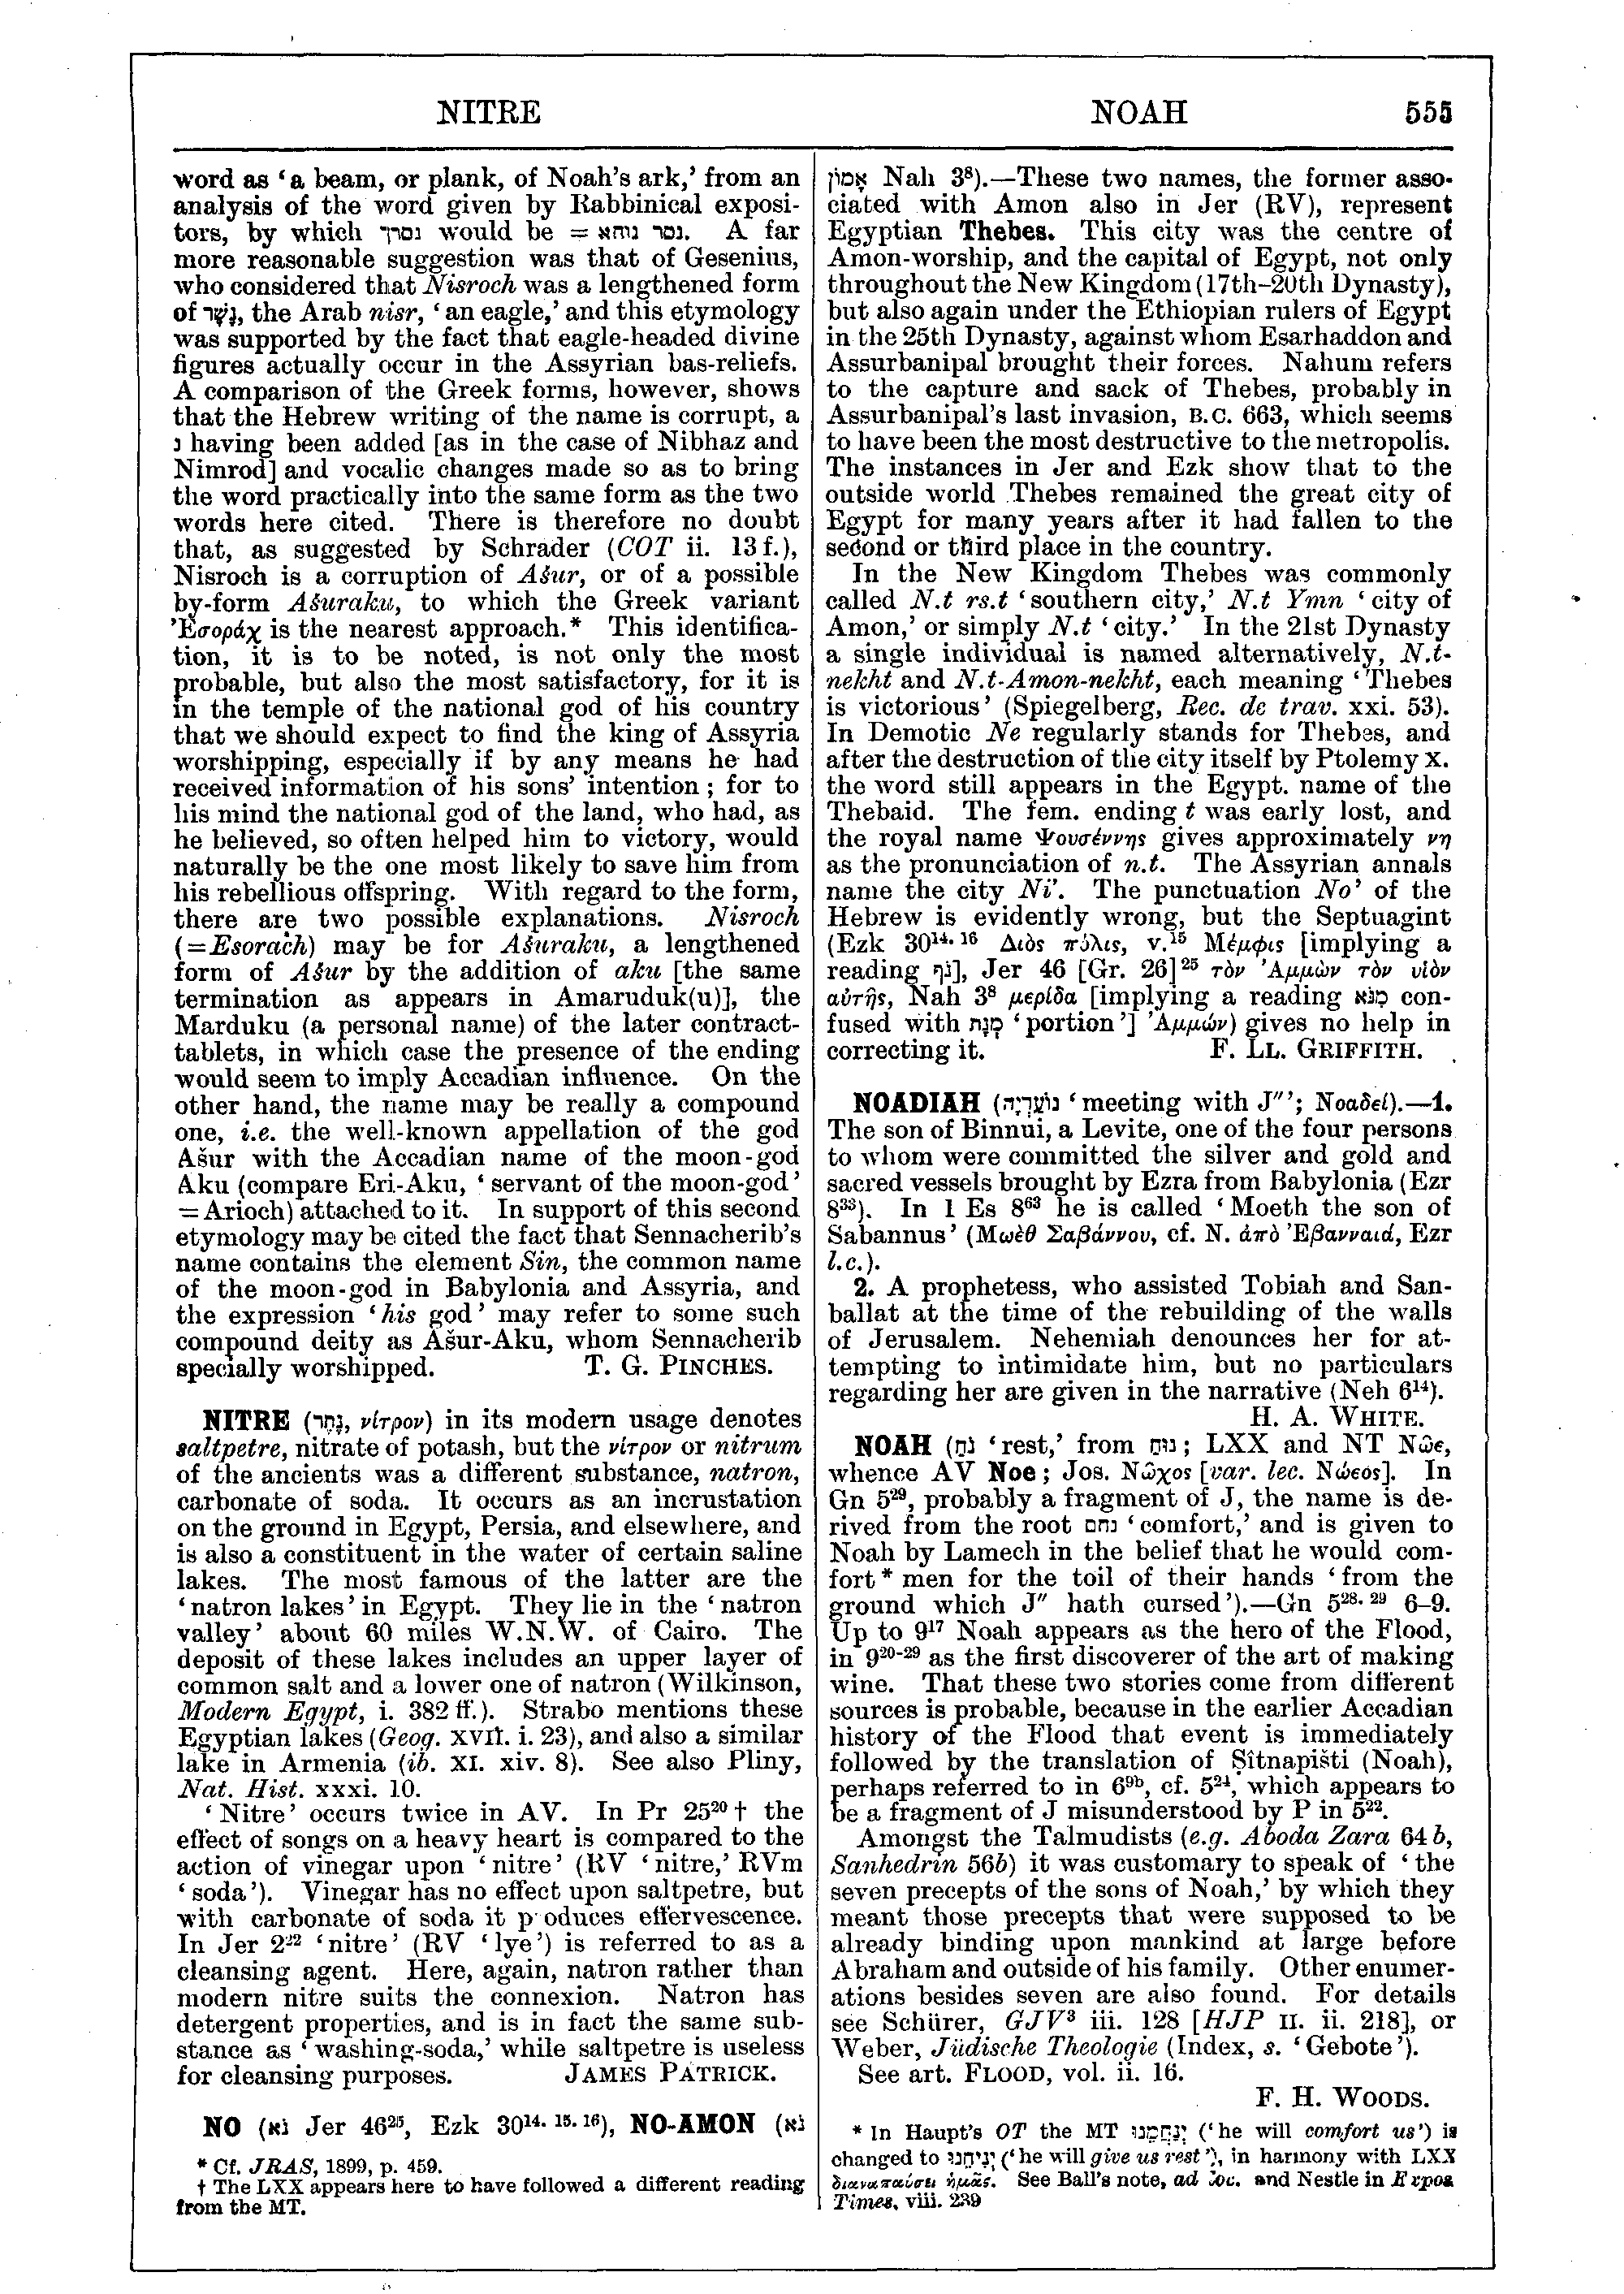 Image of page 555